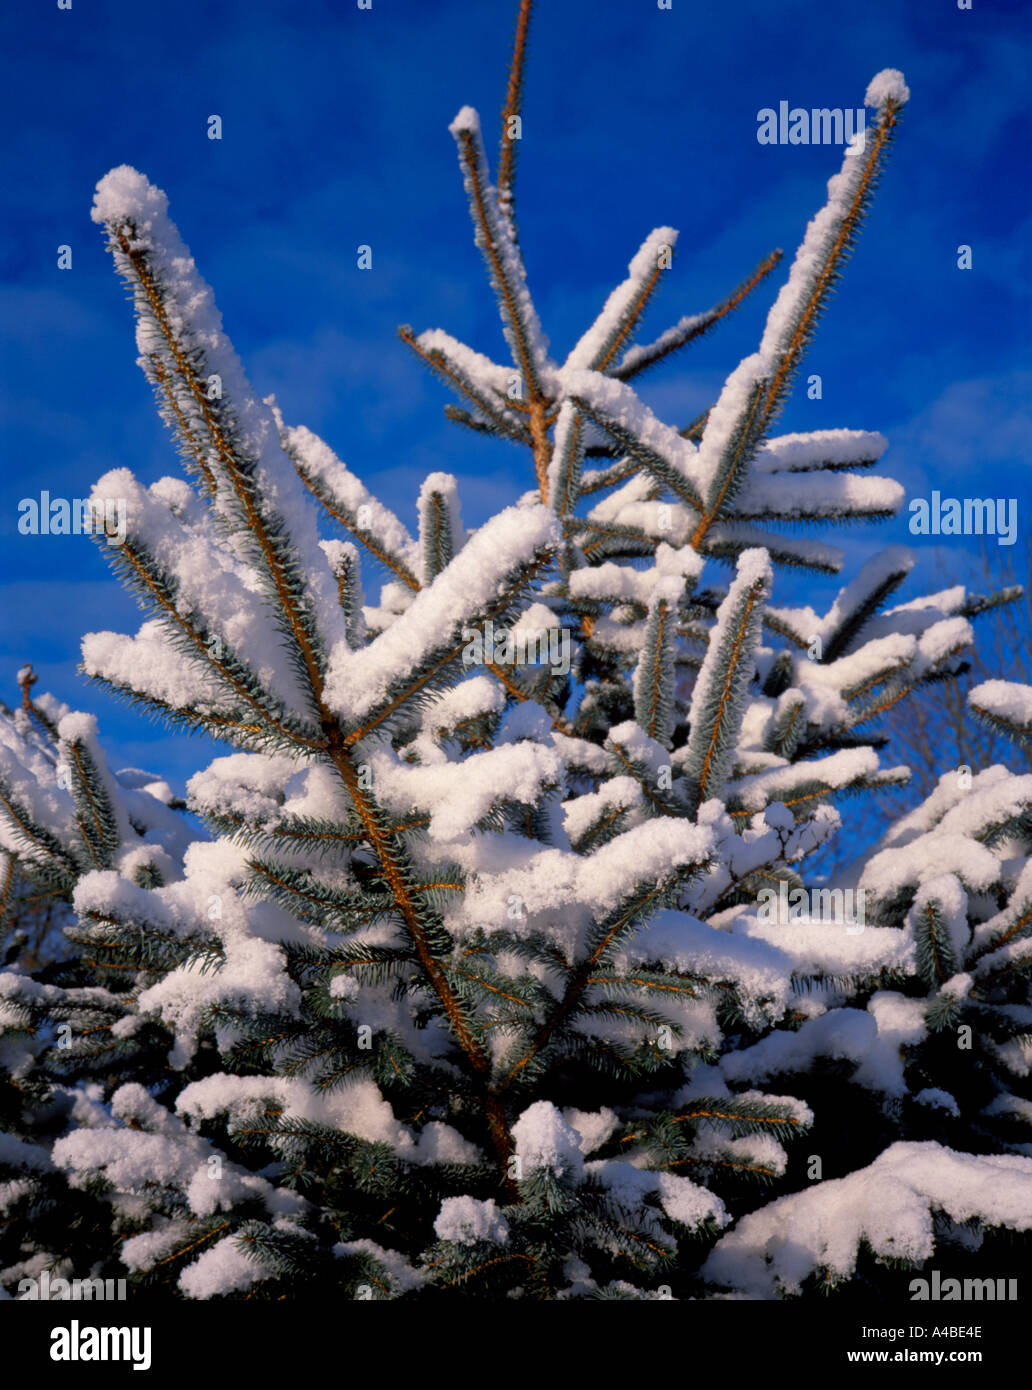 Snow on a Christmas tree {Sitka or Silver Spruce (Picea sitchensis)}. Stock Photo